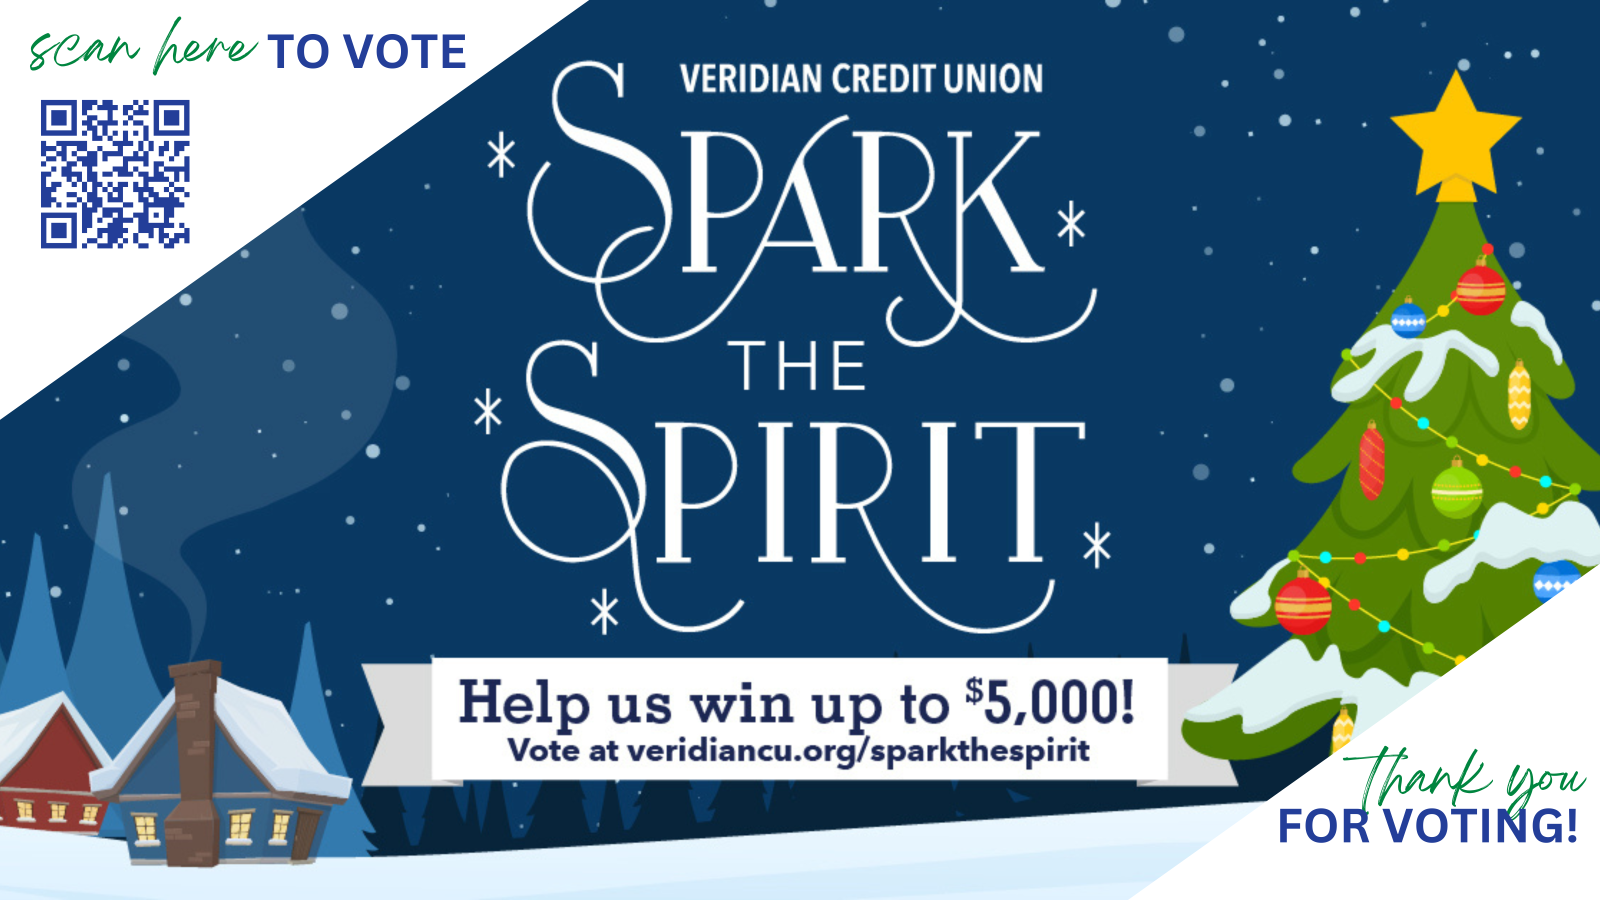 Veridian Spark the Spirit Support EPI to win $5,000